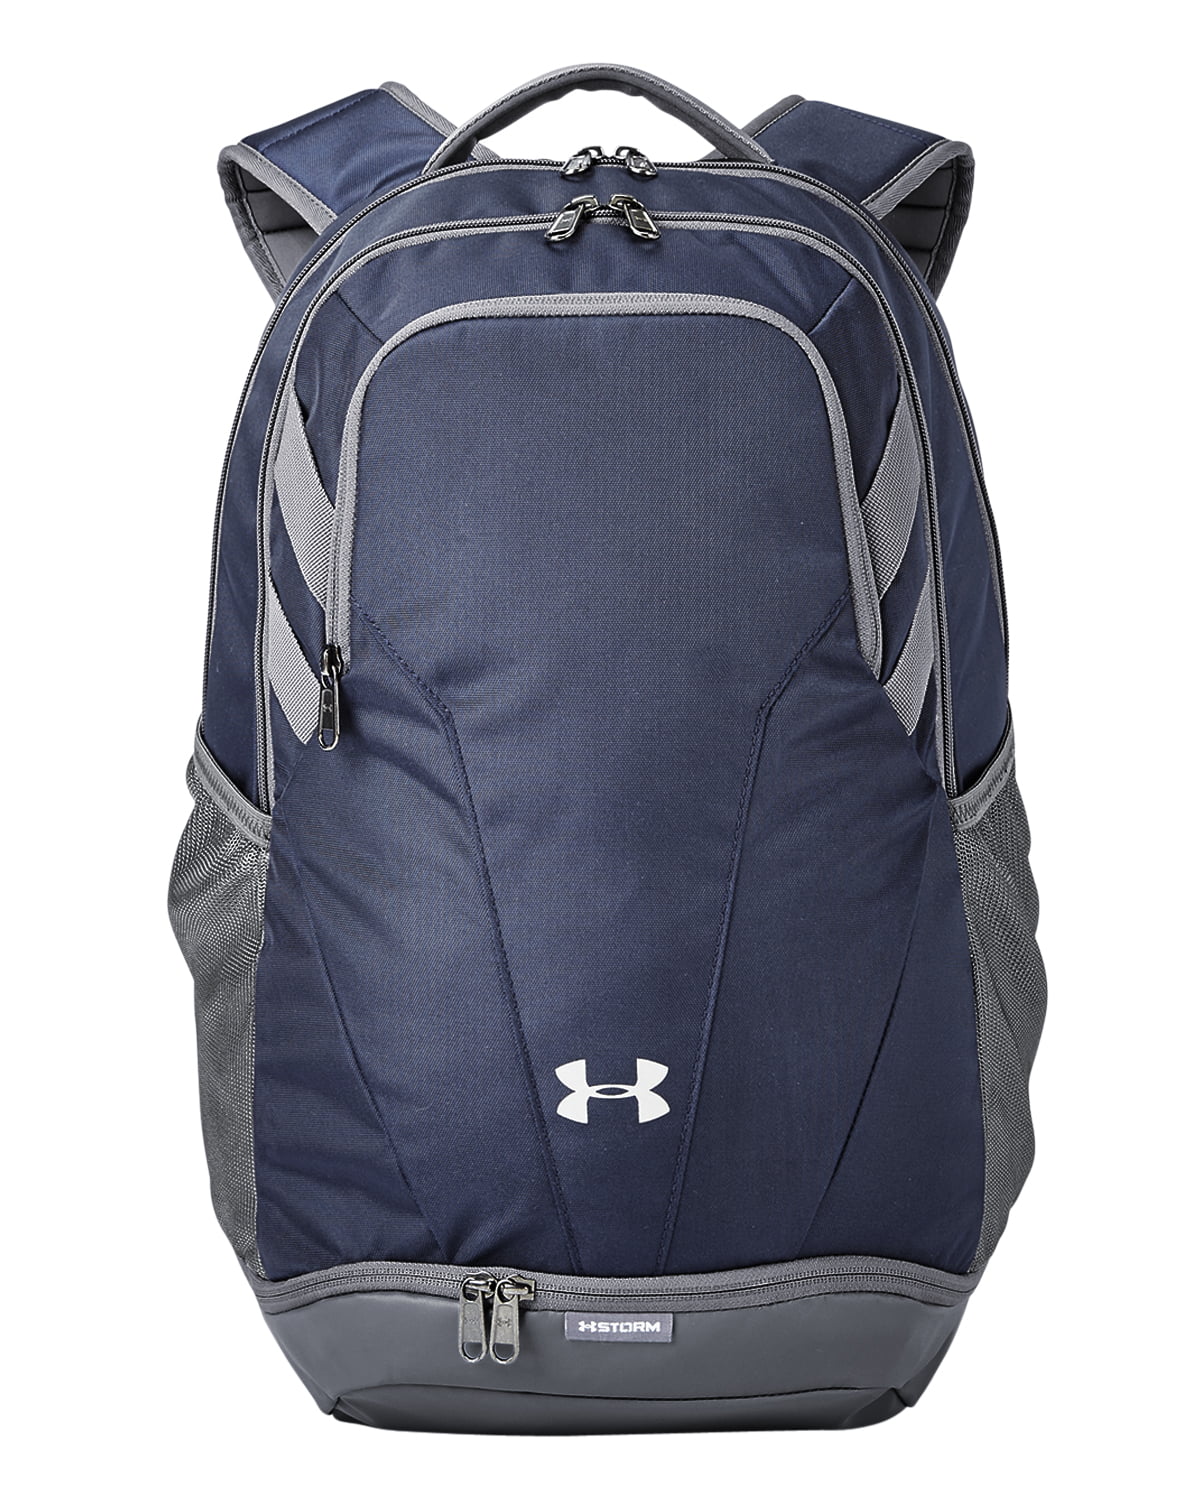 /Raisin Red One Size Under Armour Bags 1294712 Under Armour SC30 Undeniable Backpack Black Currant 923